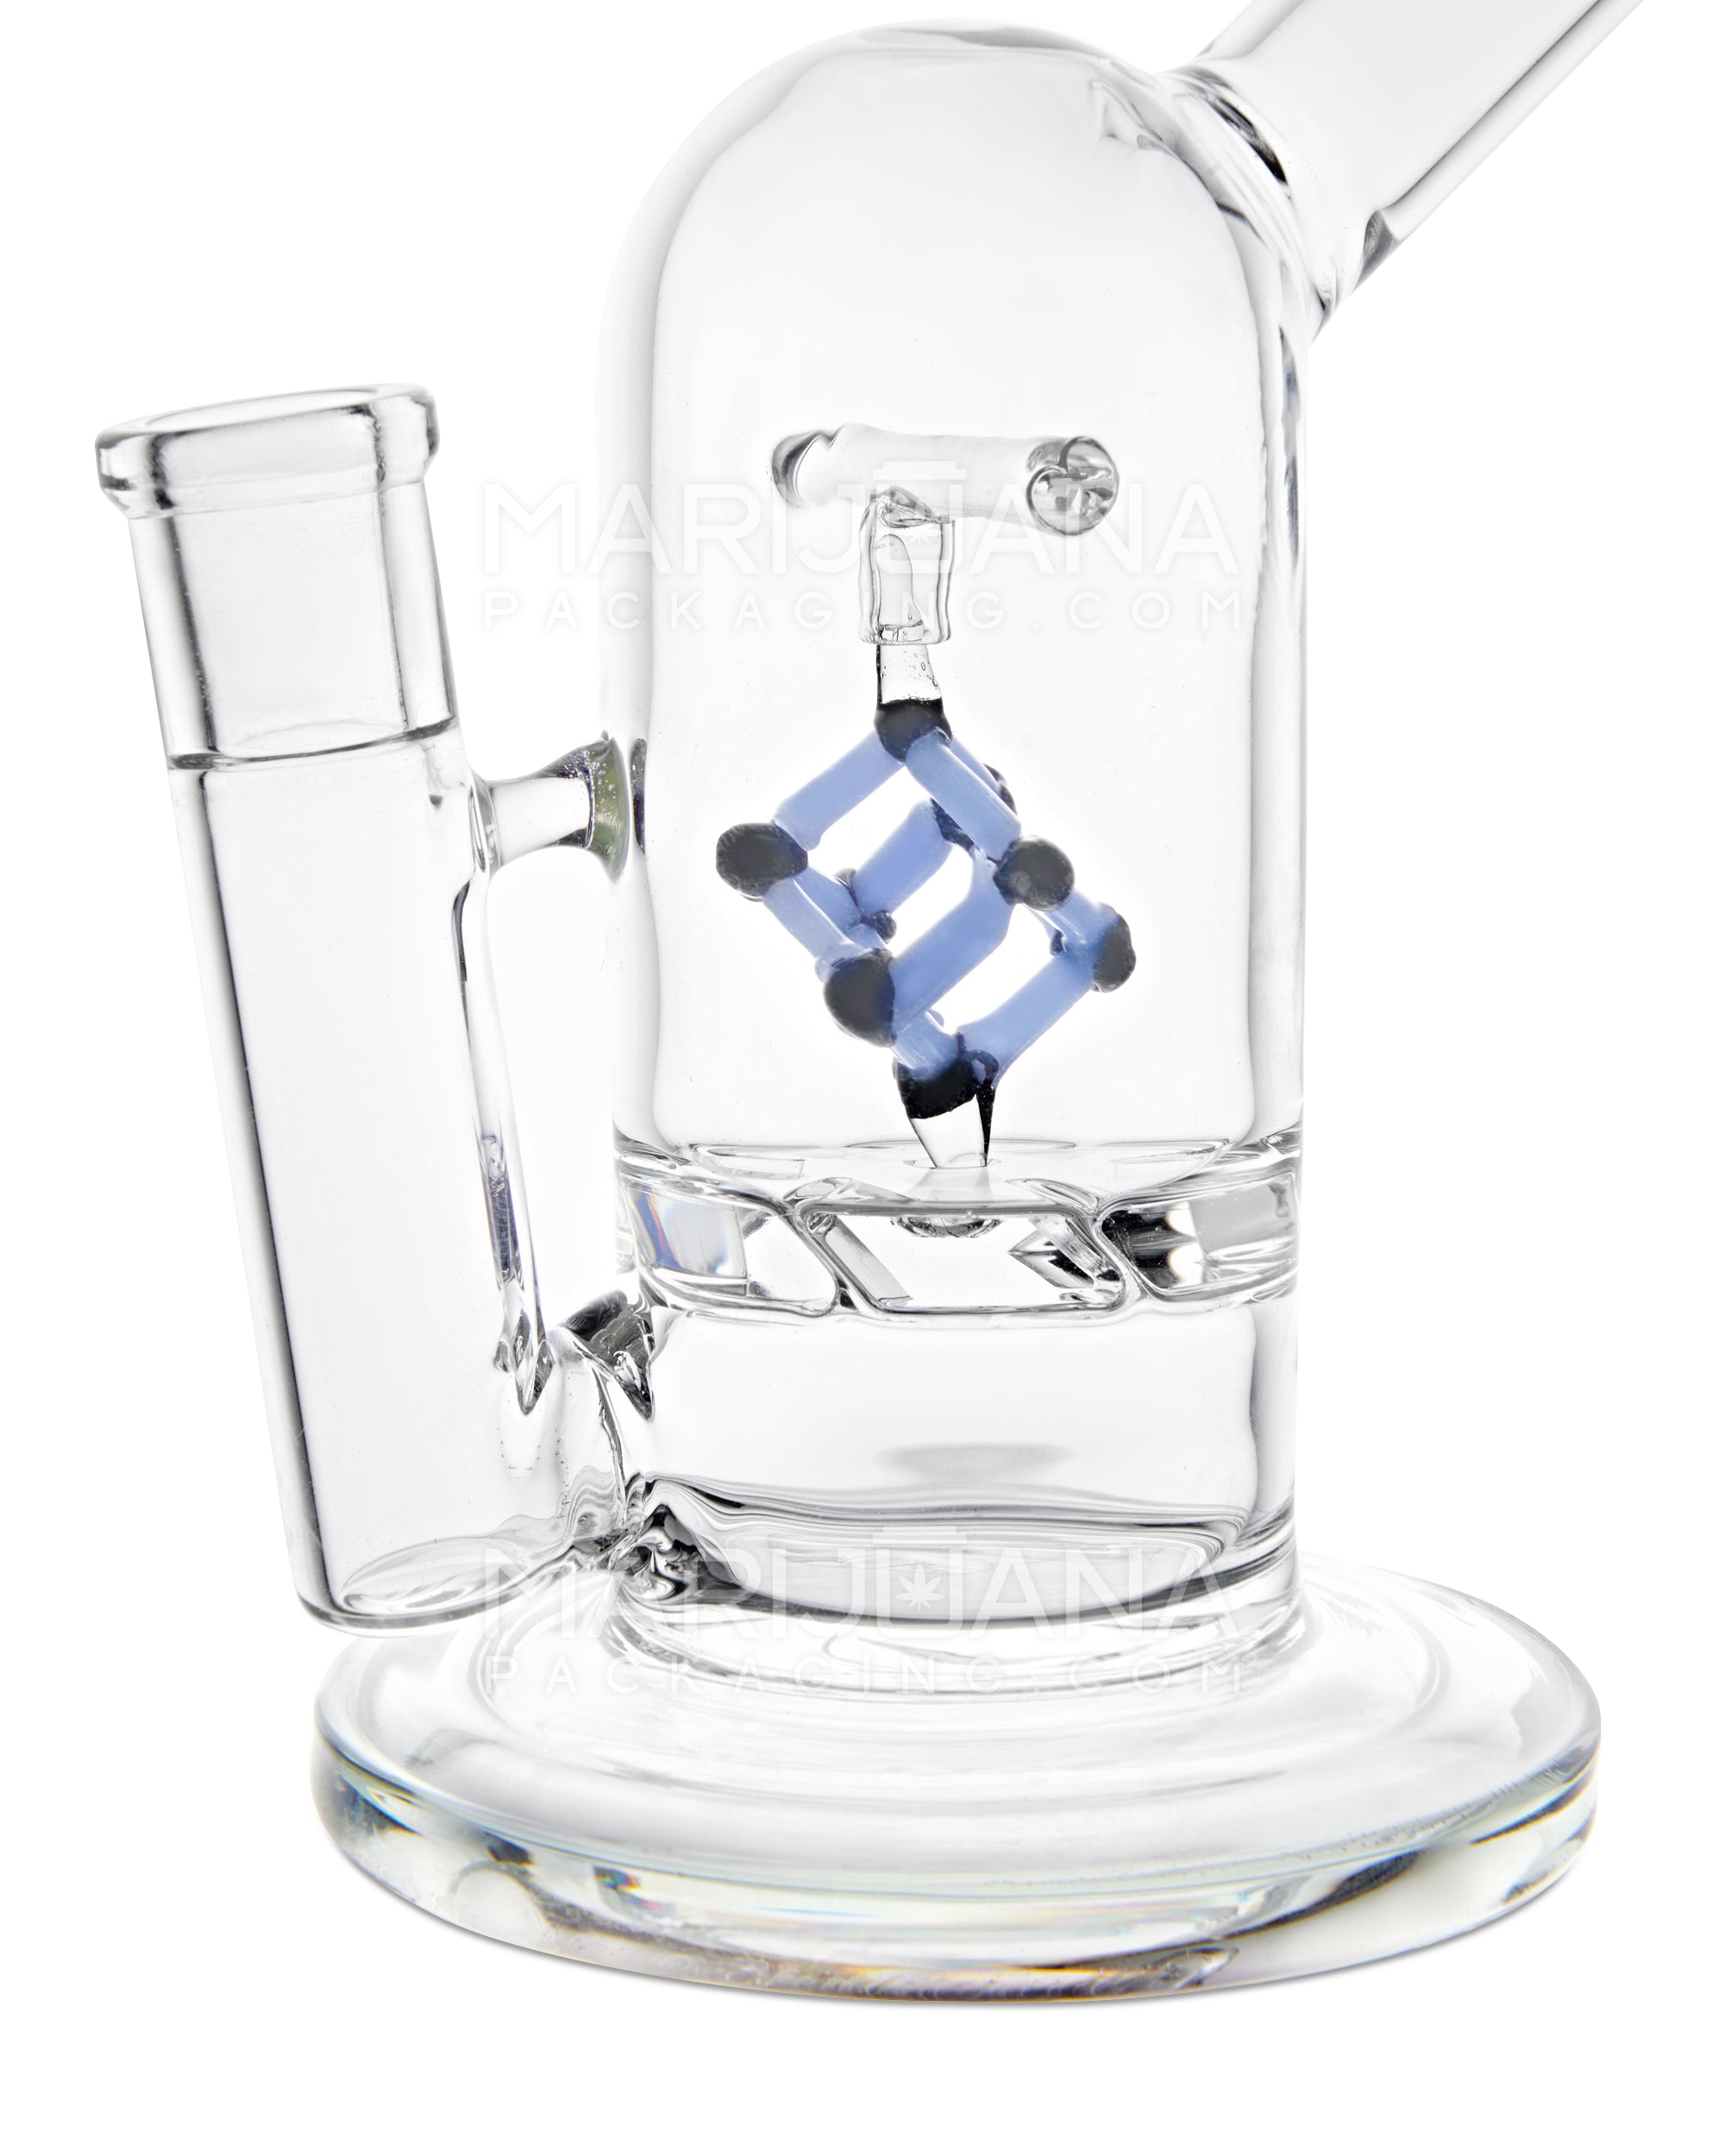 USA Glass | Vortex Perc Glass Water Pipe w/ Spinning Cube | 7in Tall - 14mm Bowl - Smoke